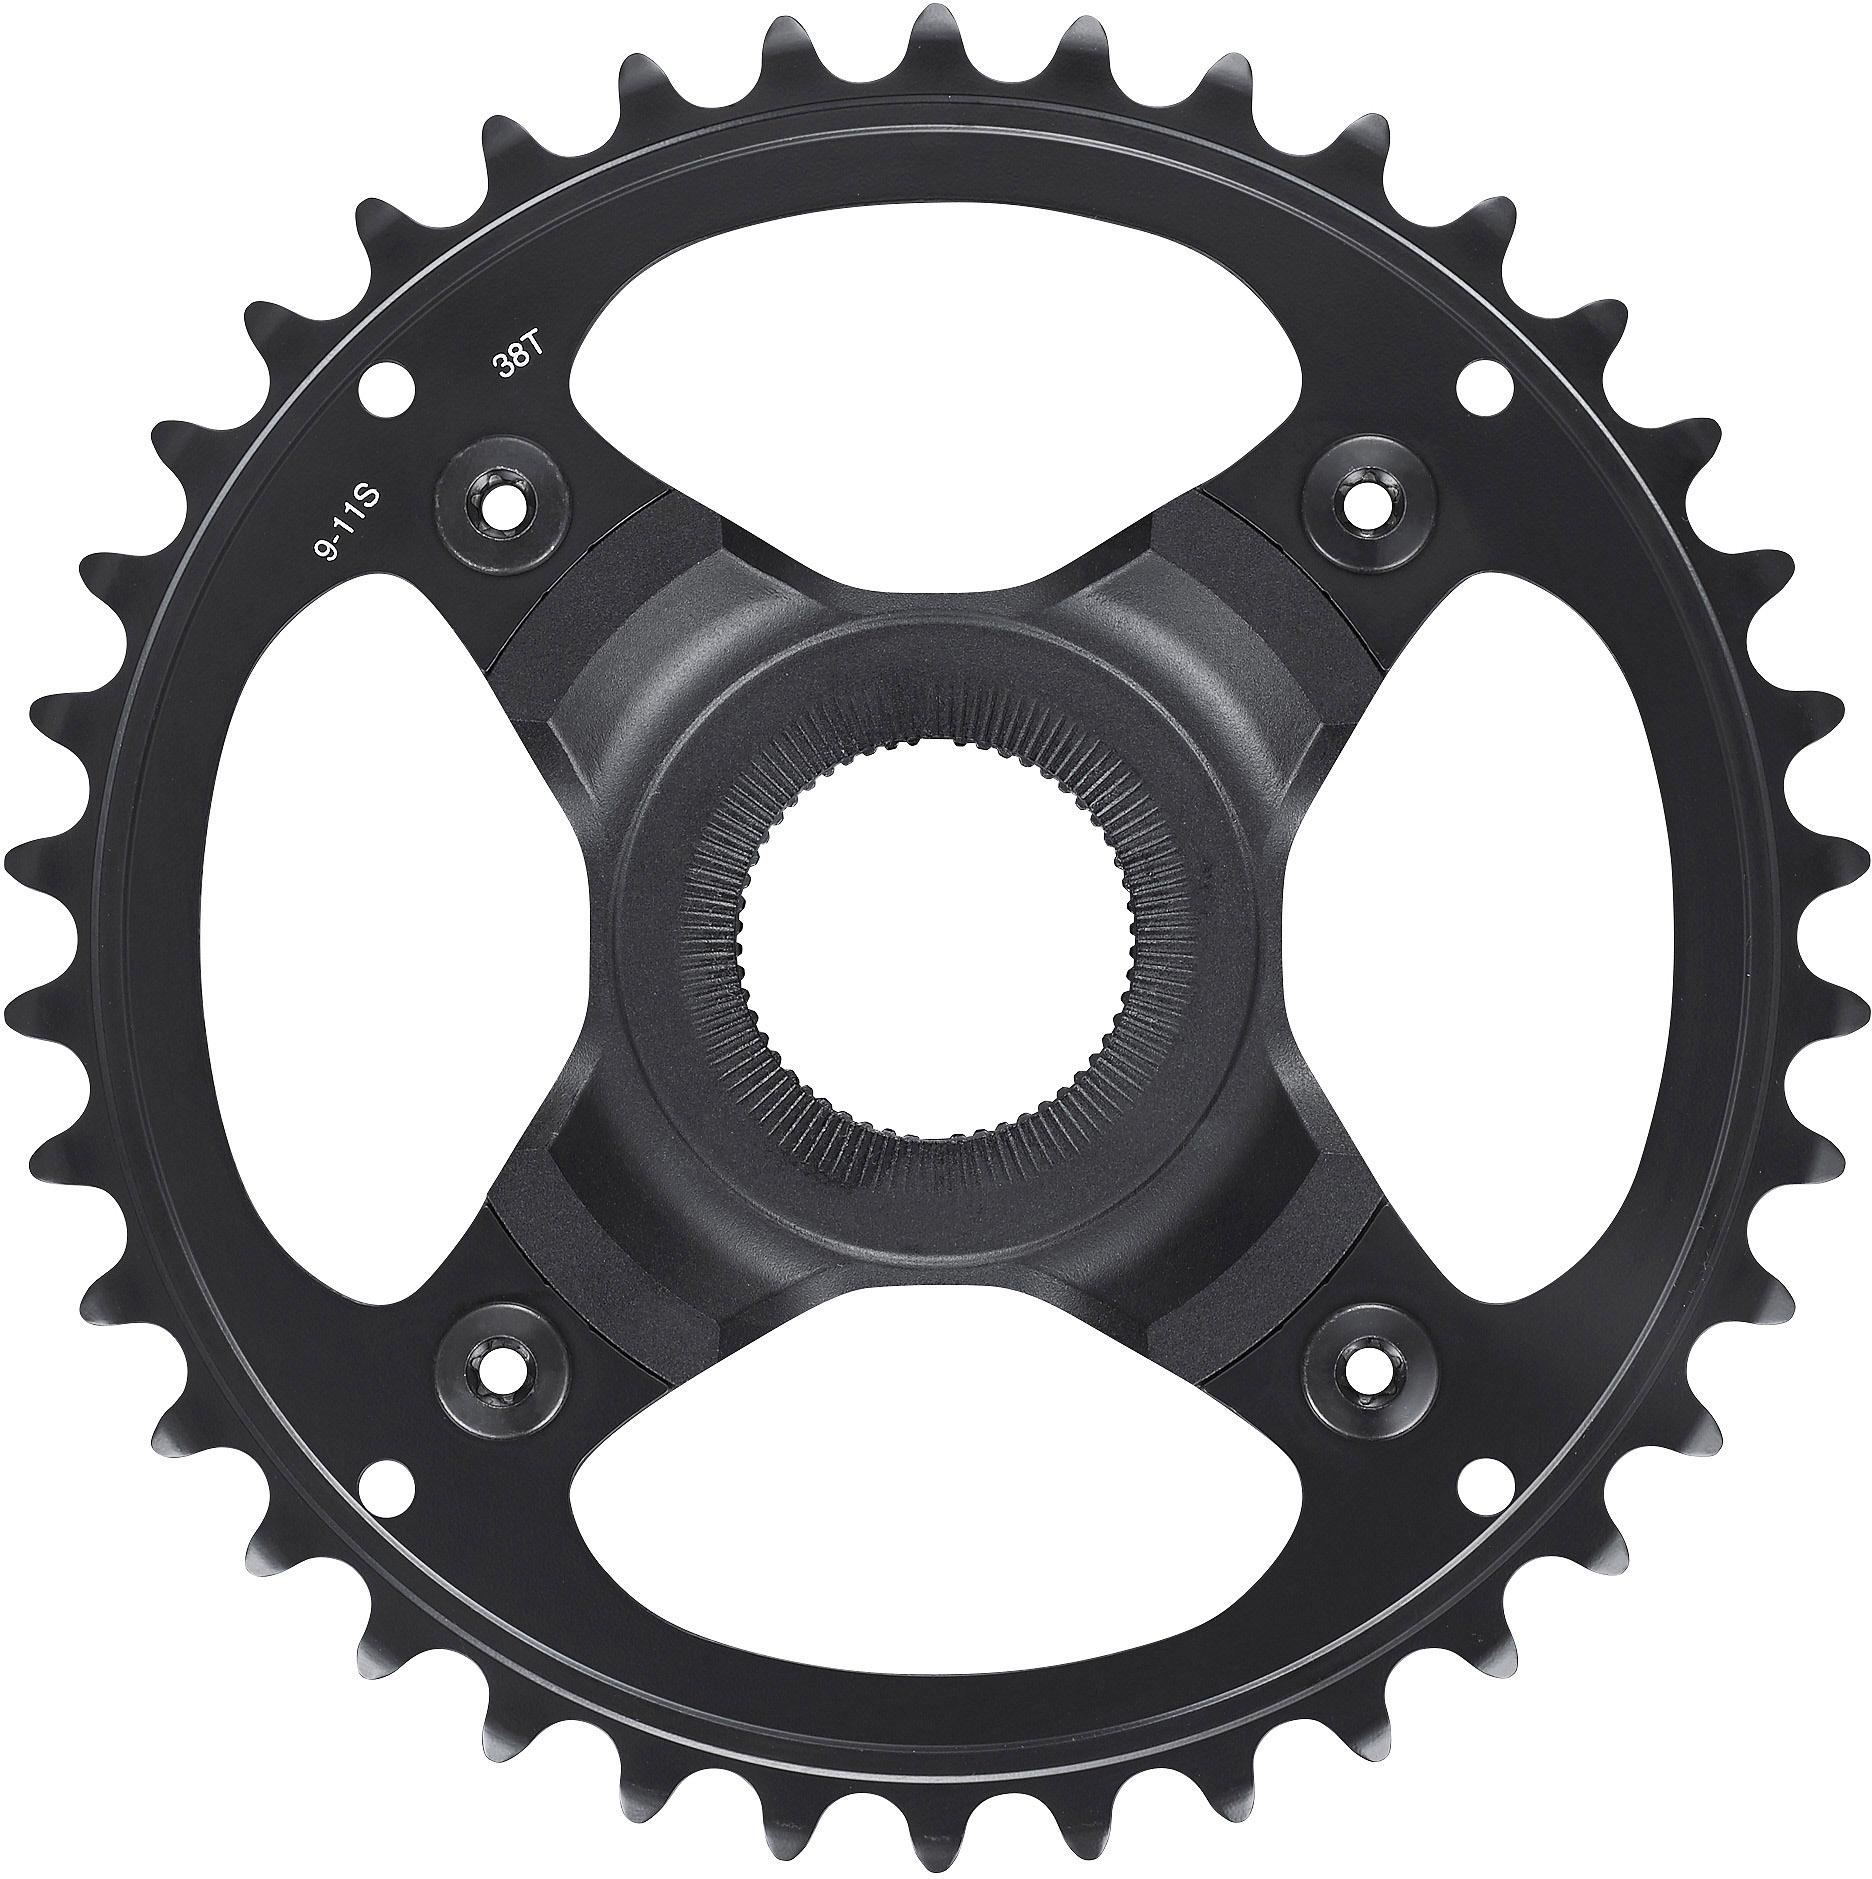 Shimano Steps Sm-cre70 Chainring Without Chainguard - Black